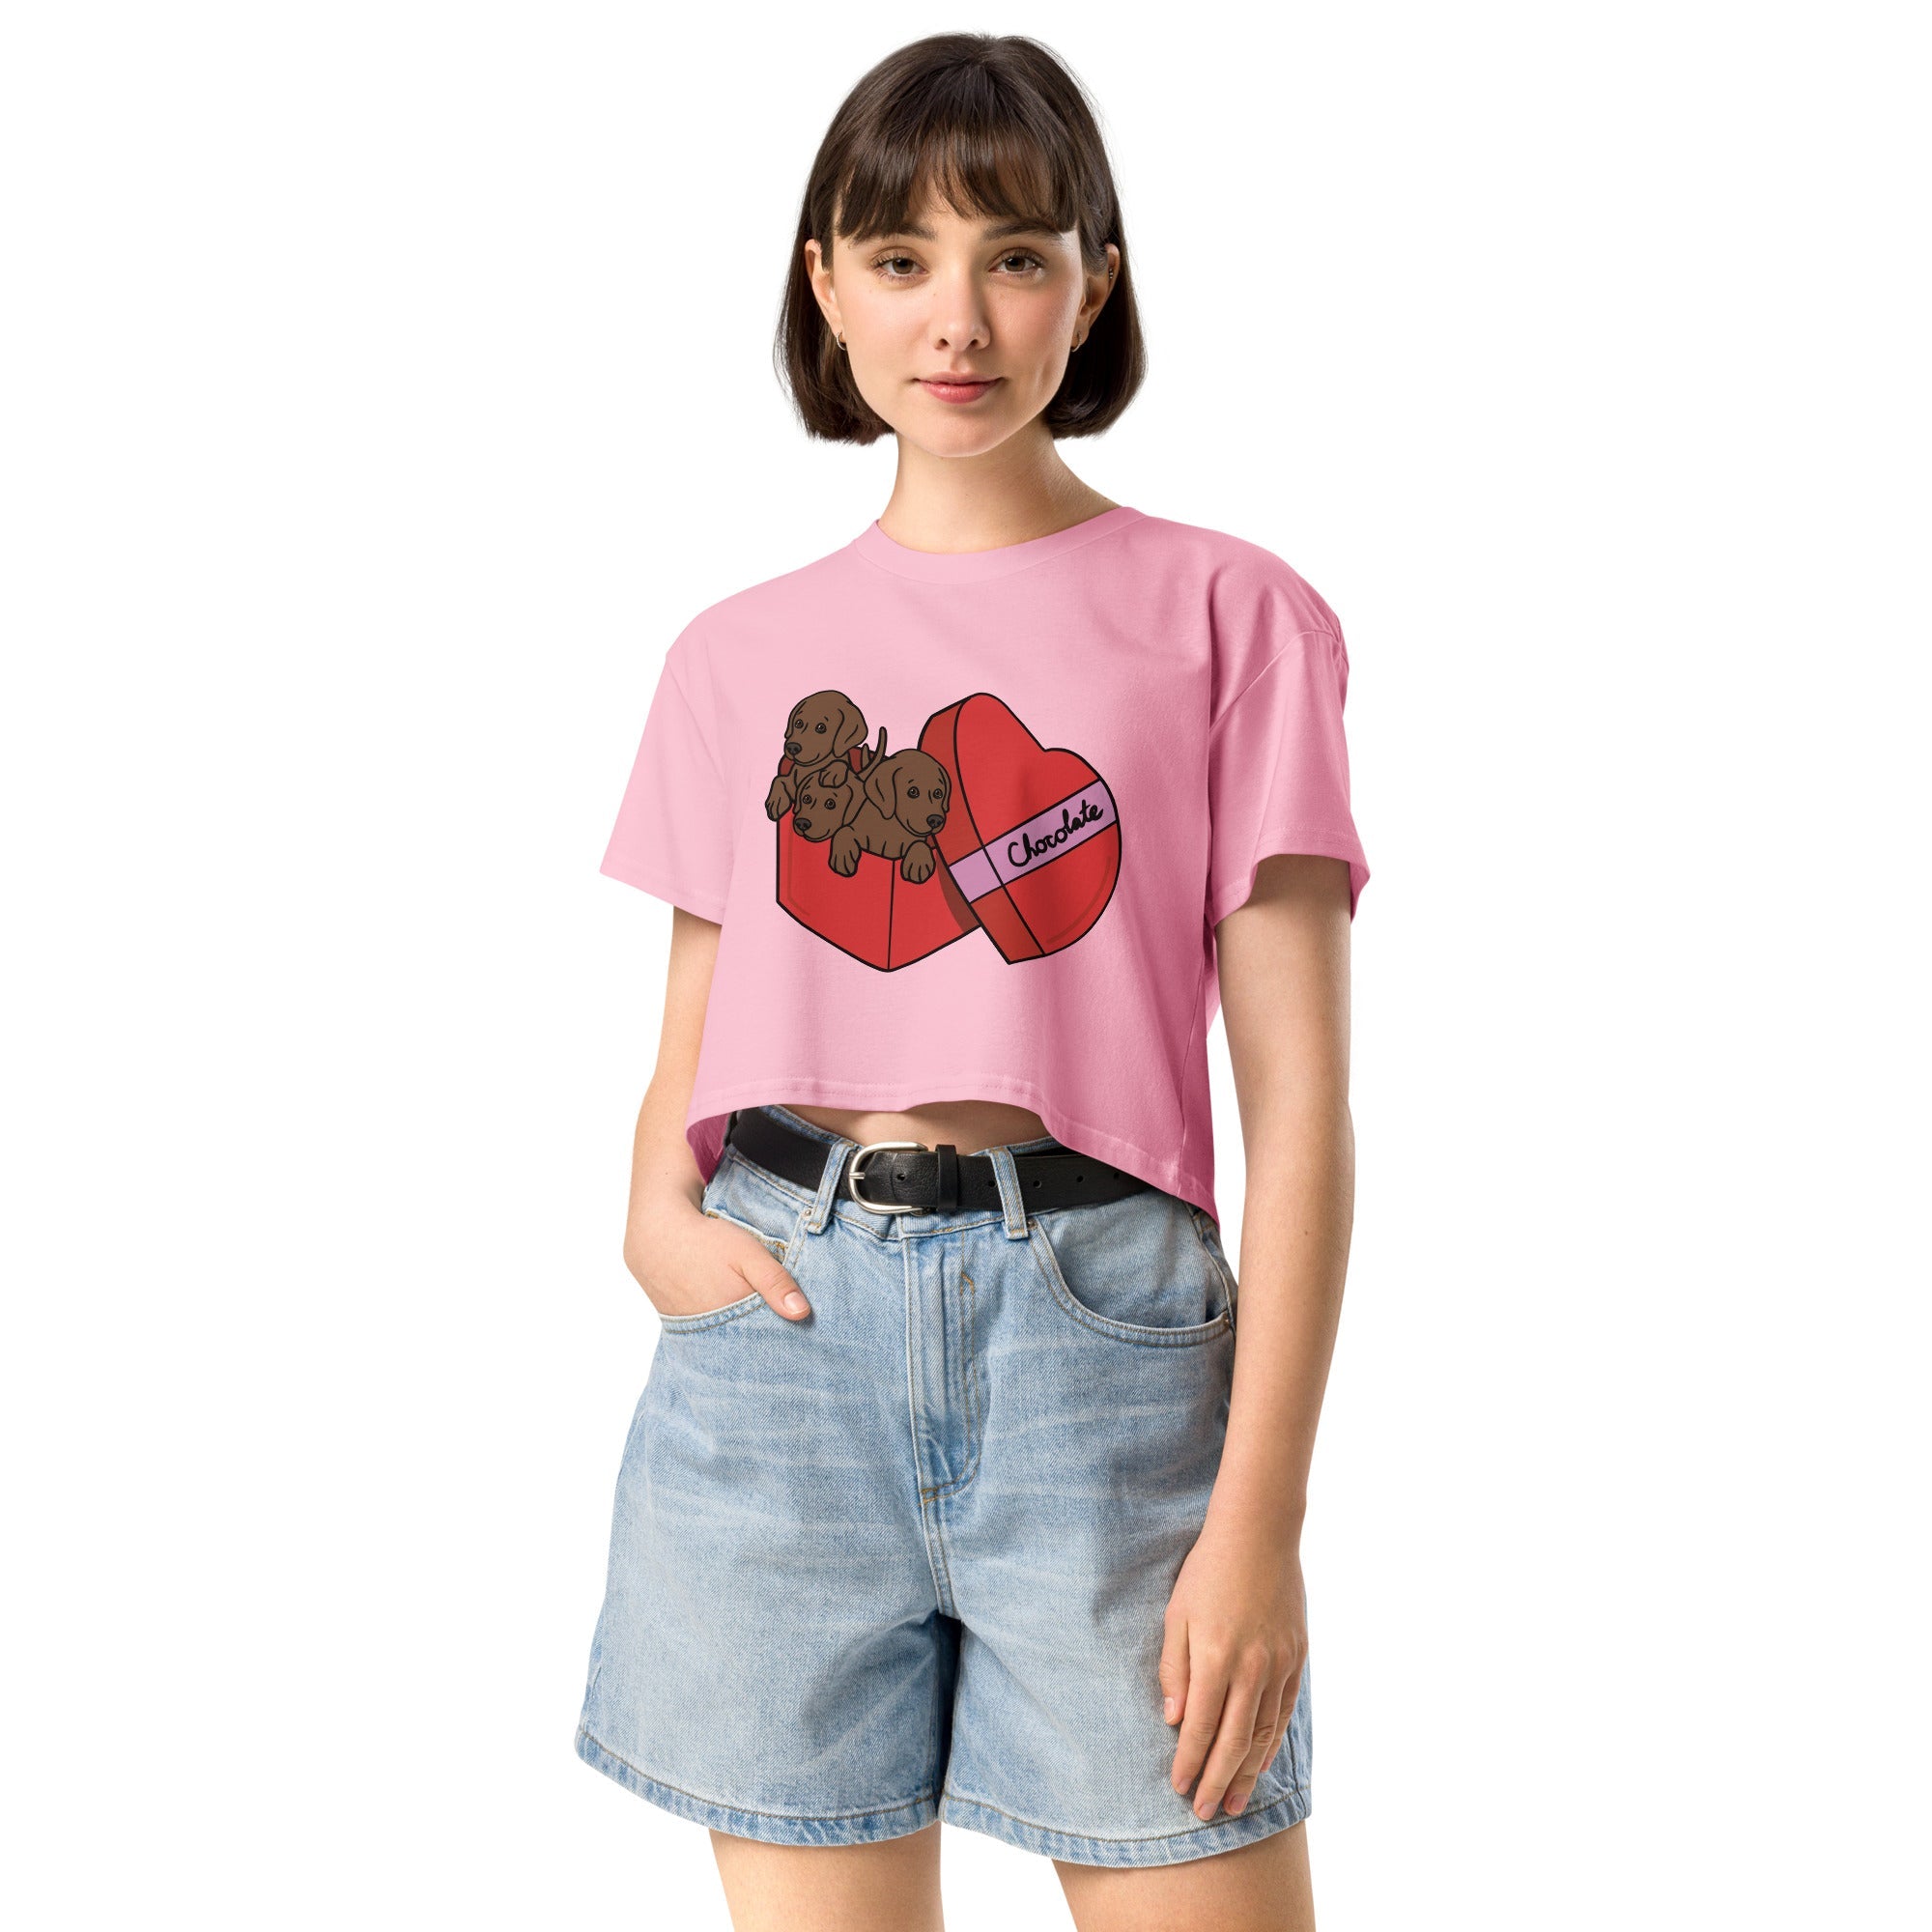 Box of Chocolates Crop Top - TAILWAGS UNLIMITED